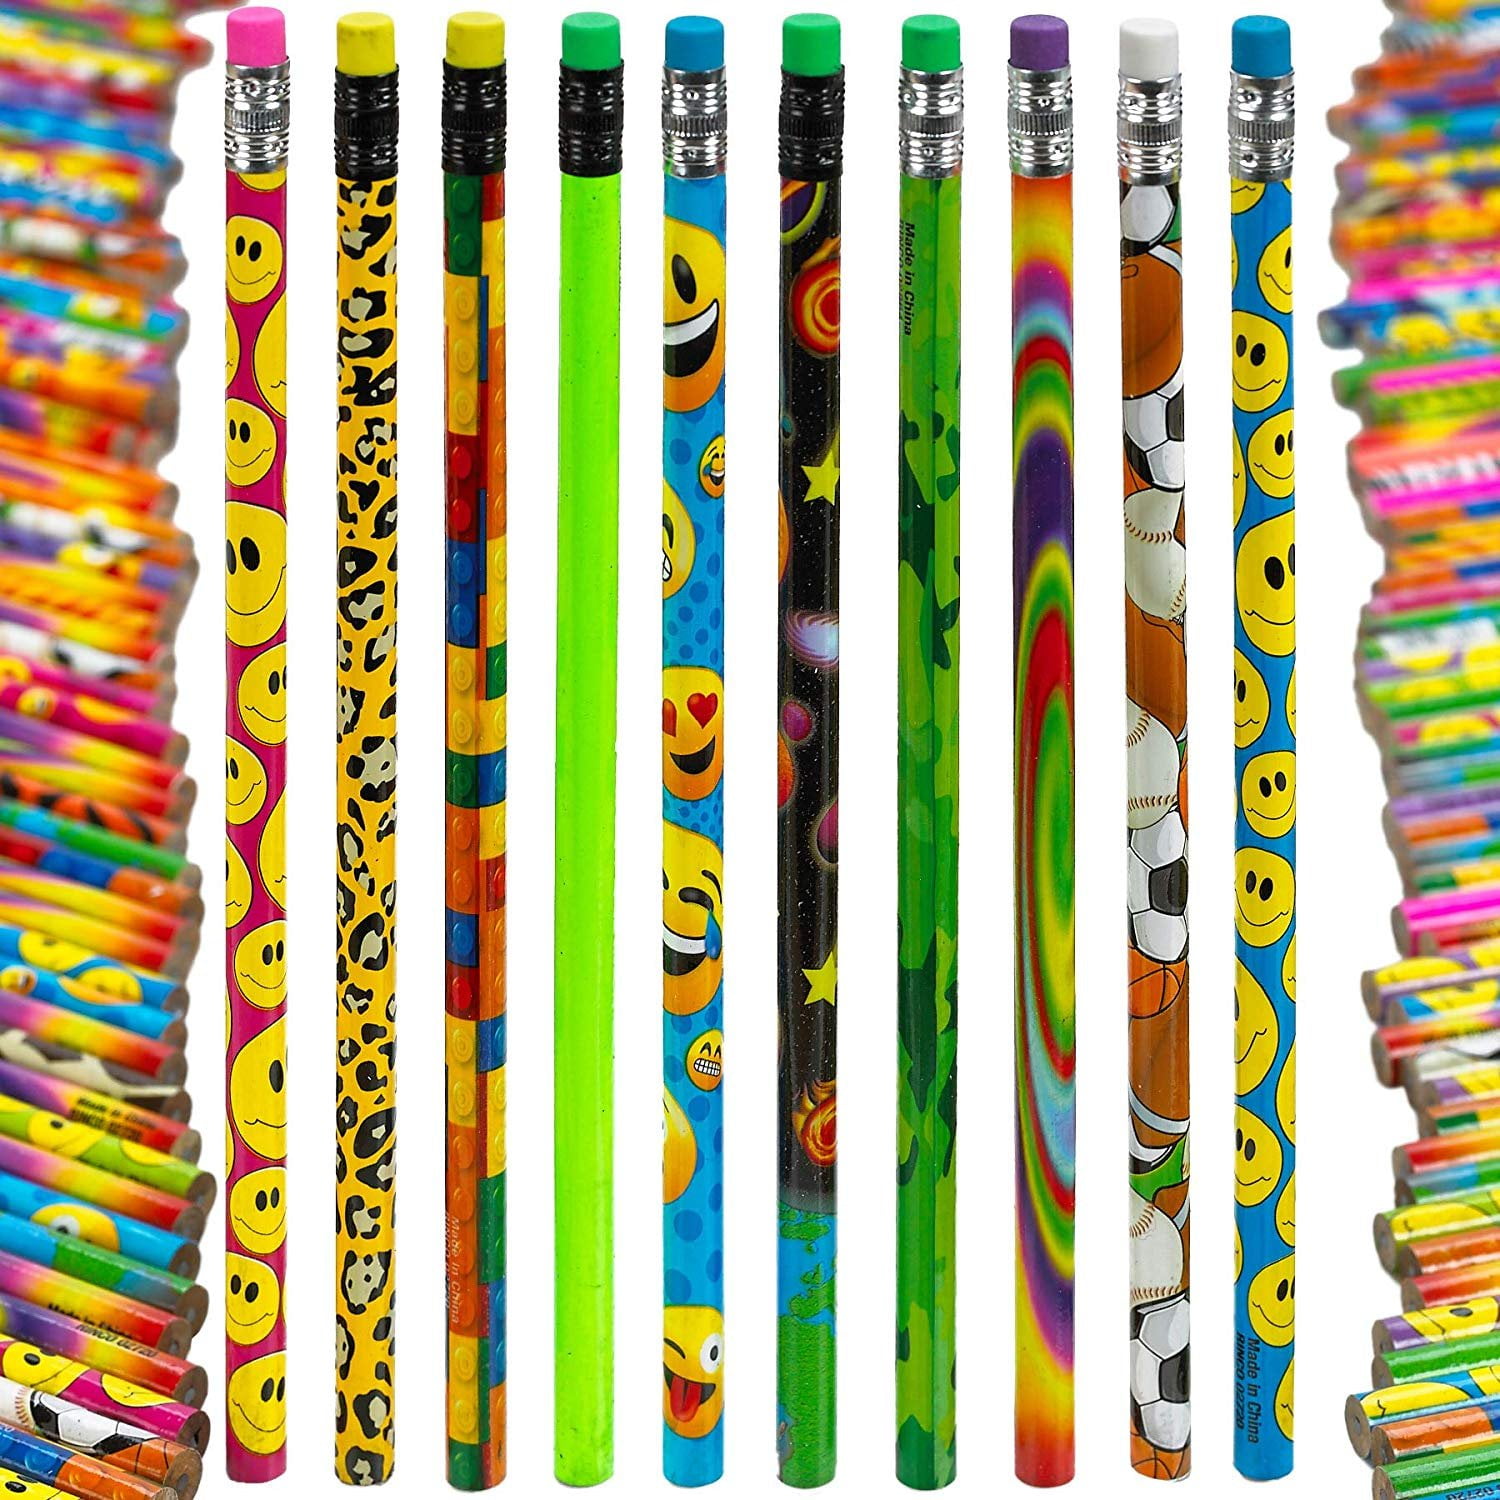 Kicko Pencil Assortment - 7.5 inch - Assorted Colorful Pencils for Kids